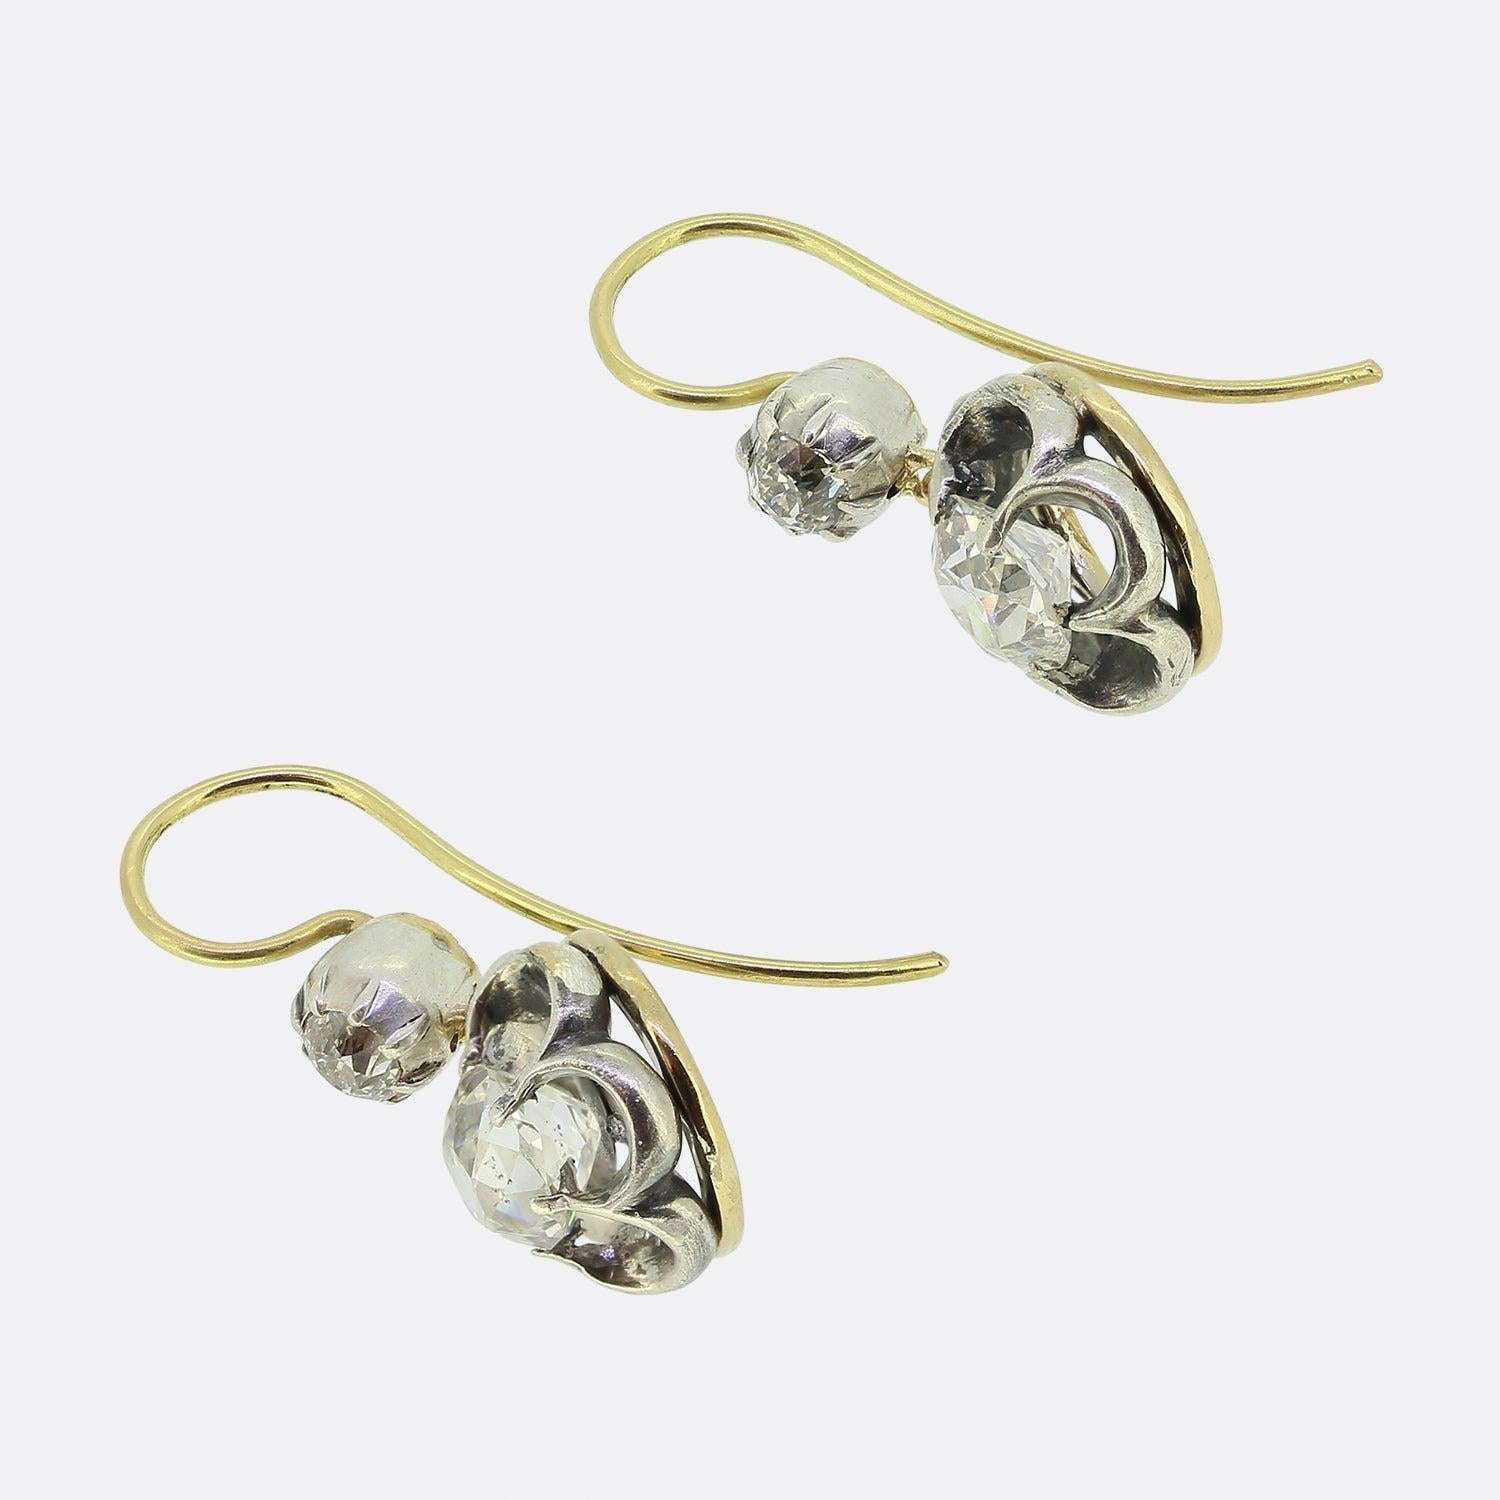 This is an exquisite pair of Victorian drop earrings. Each earring is set with a large, antique cushion cut diamond and a small old cut diamond accent set above. The earrings have French wire fittings which sit very comfortably on the ear and allow